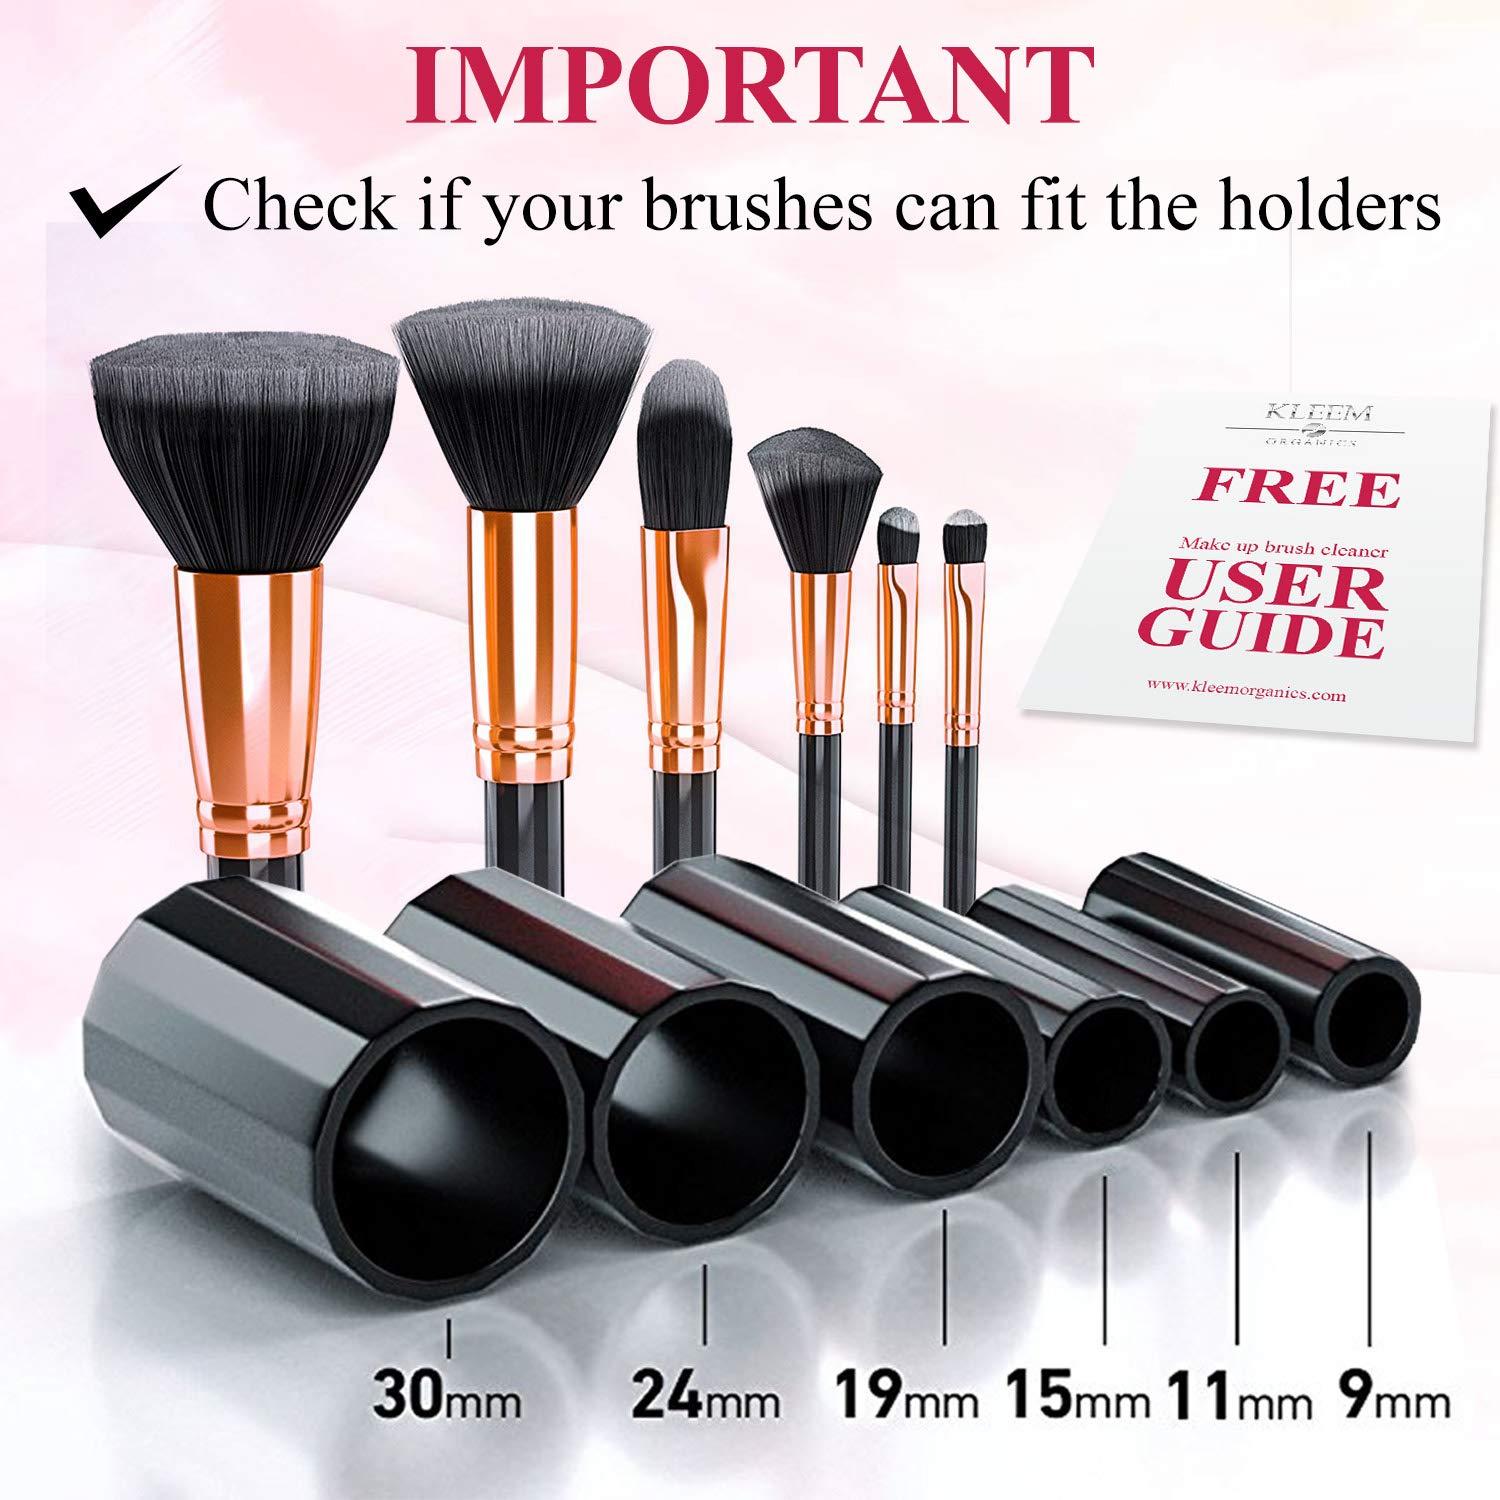 Electric Makeup Brush Cleaner With Drying Rack, 2 In 1 Wash&Dry Makeup  Brush Cleaner Machine, Suitable For Various Sizes Of Beauty Makeup Brushes  r1 